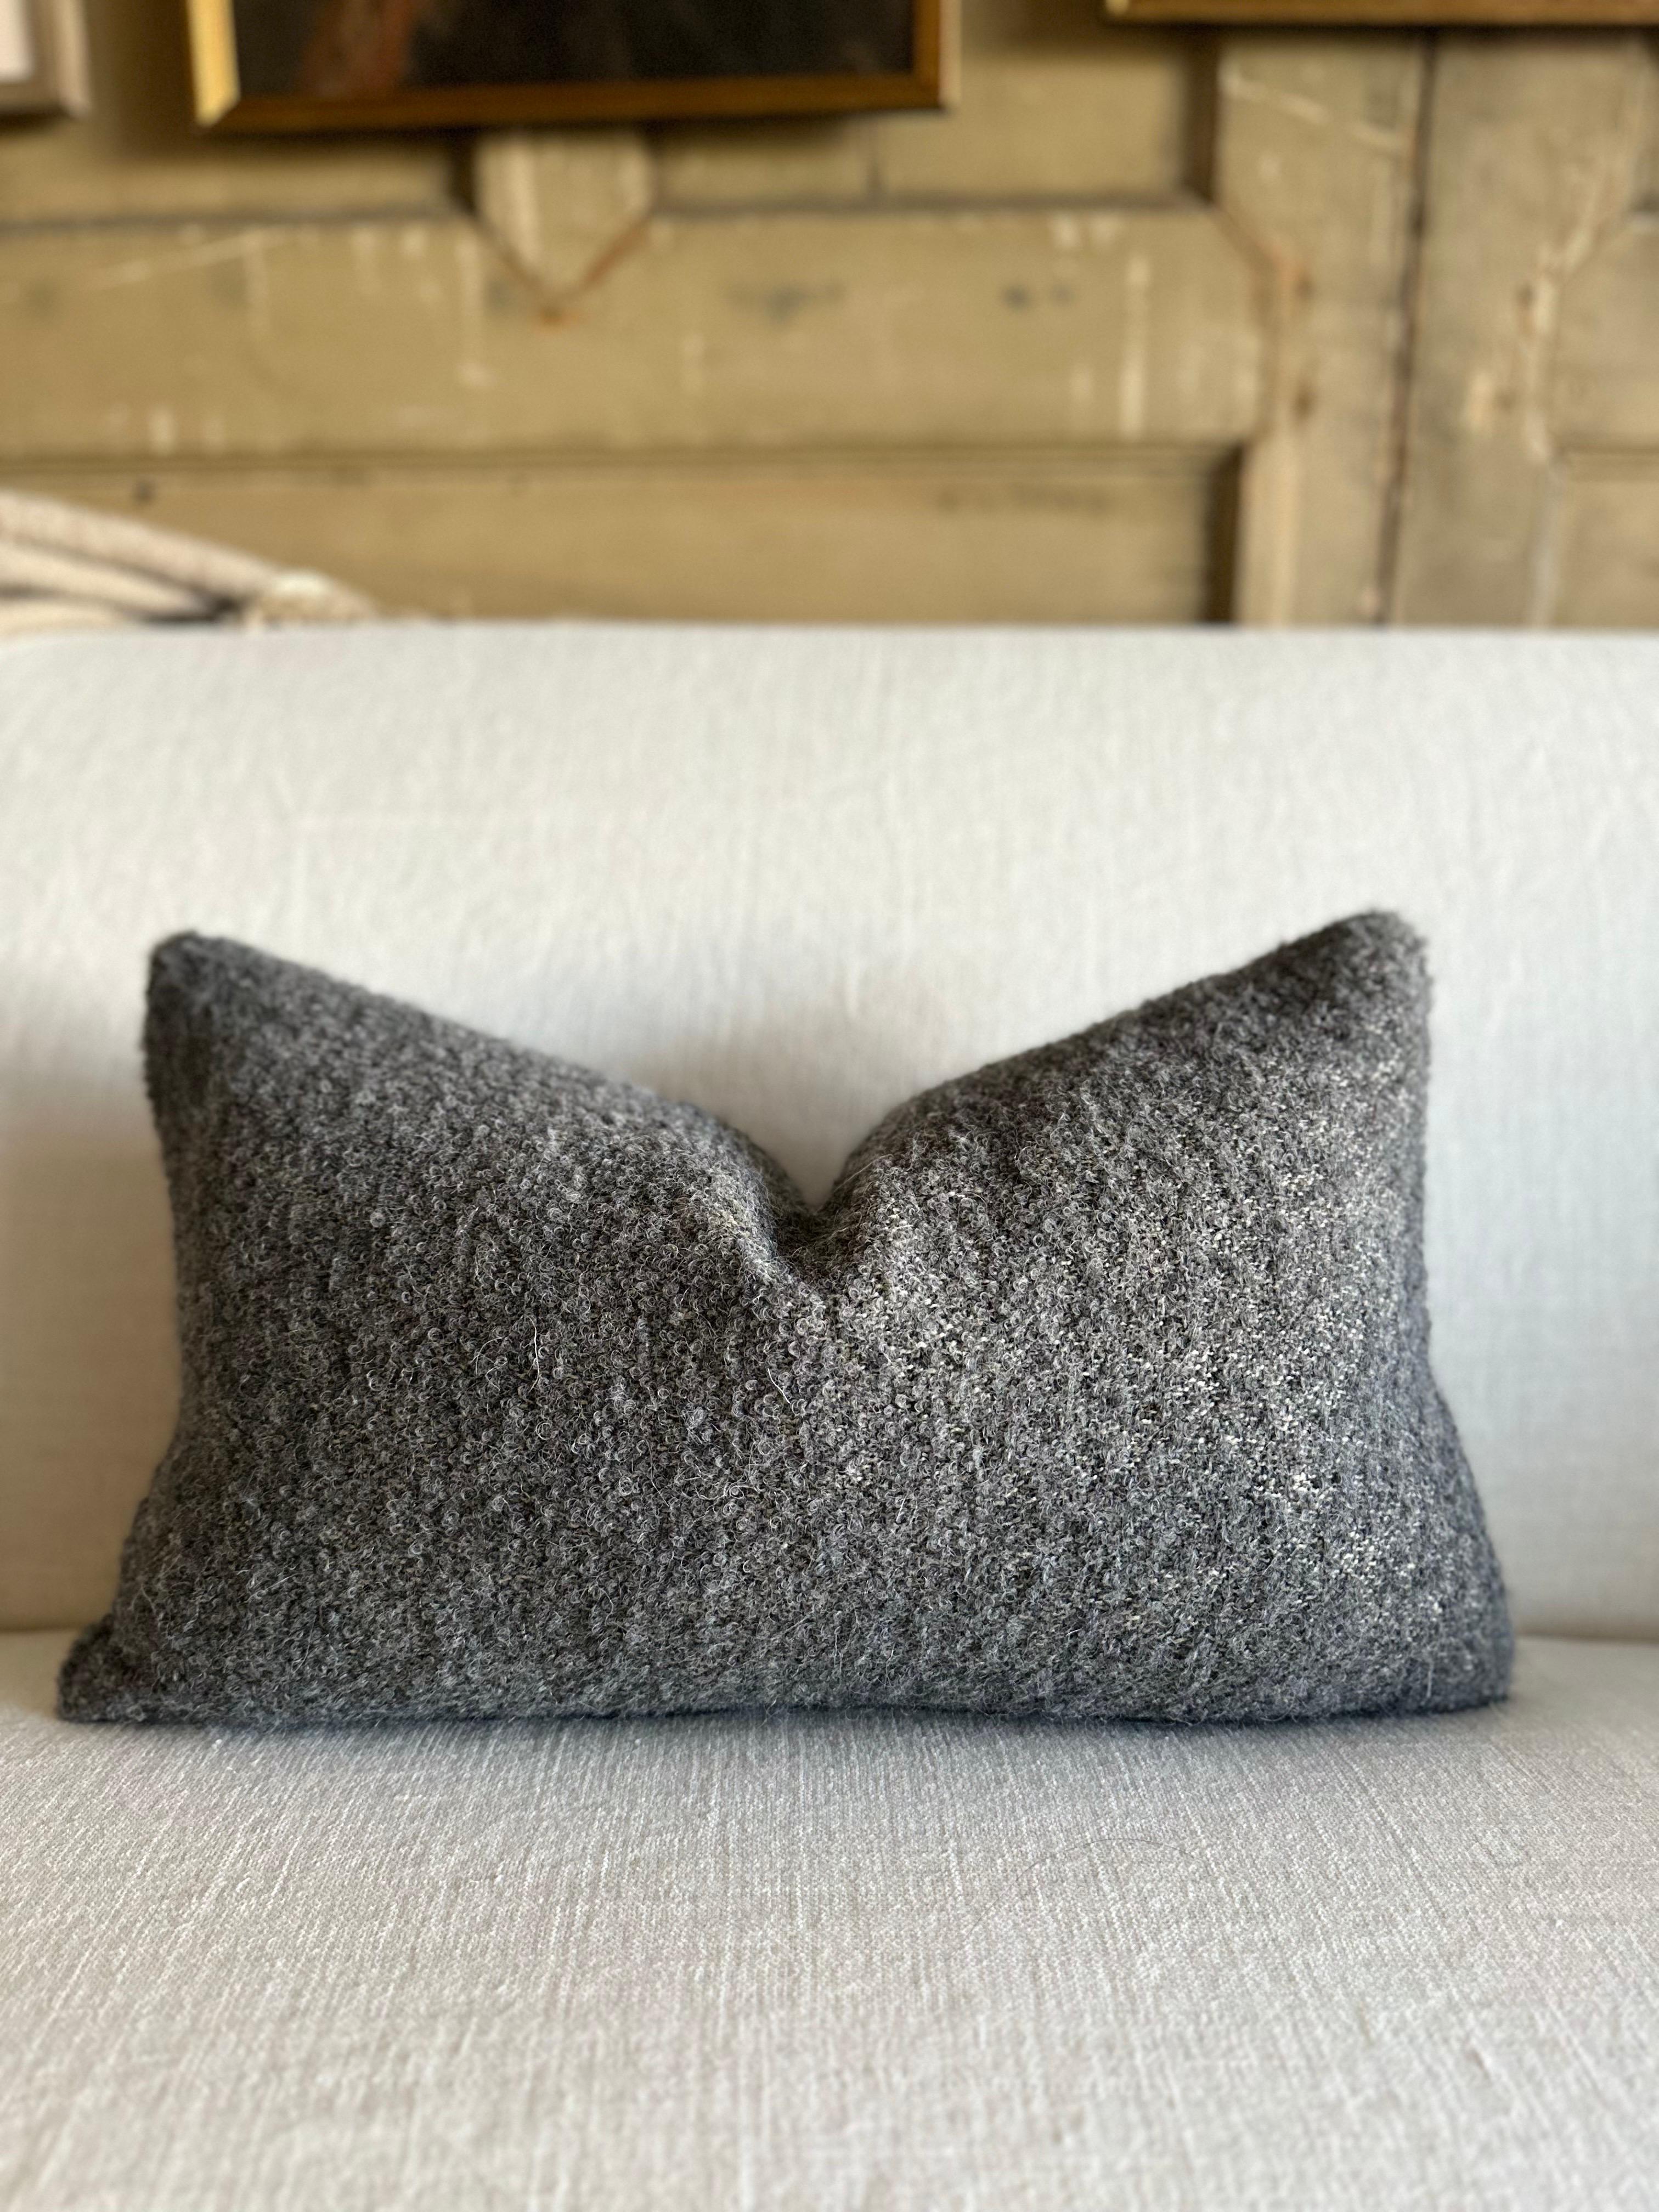 Hand Woven Wool and linen Petite Lumbar Pillow
Extremely soft to the hand, this beautiful smoke gray colored boucle style lumbar pillow is a perfect accent to your space.
Includes Down/Feather insert
Size: 12